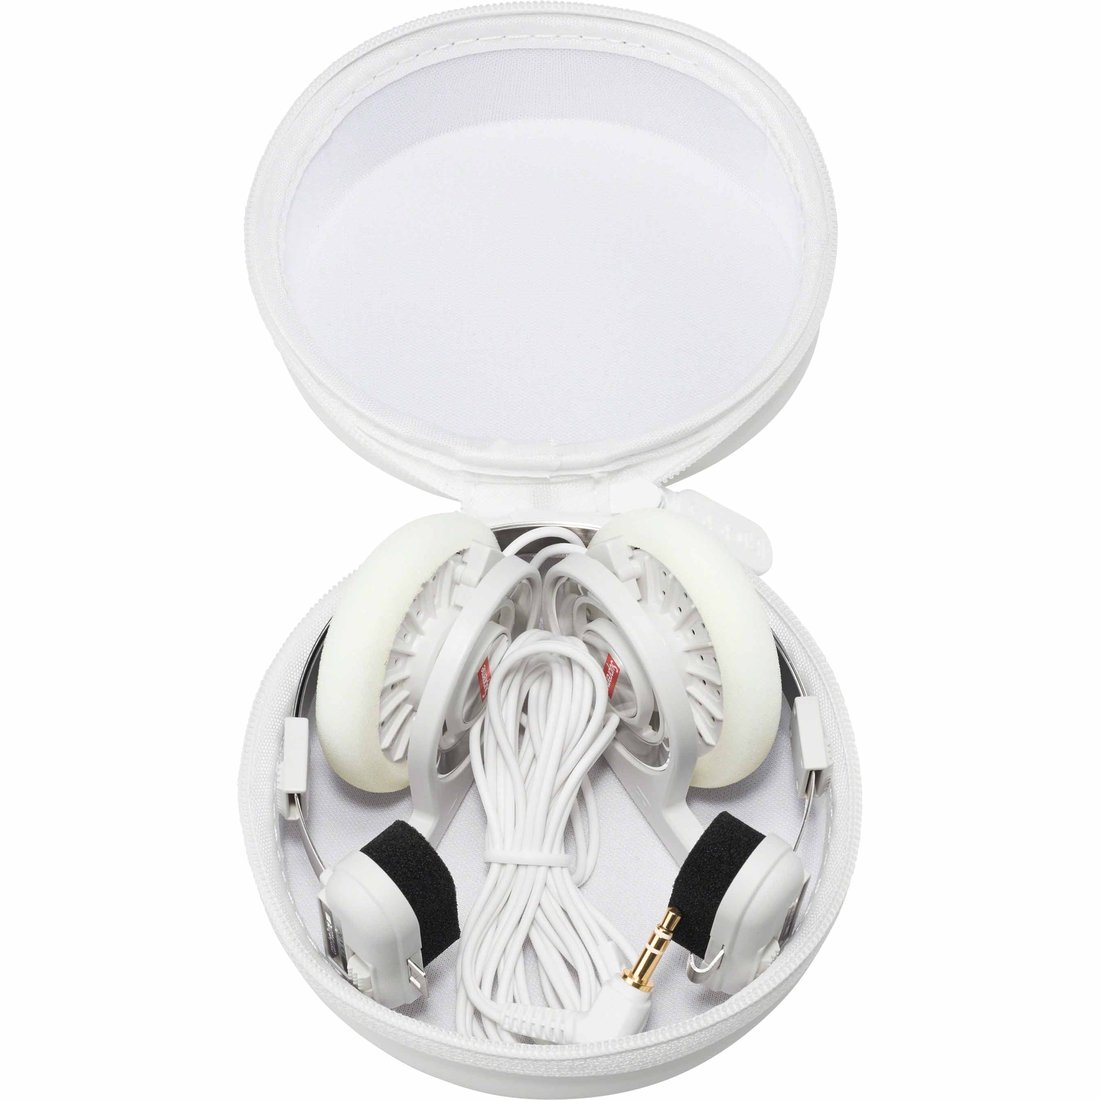 Details on Supreme Koss PortaPro Headphones White from fall winter 2023 (Price is $68)